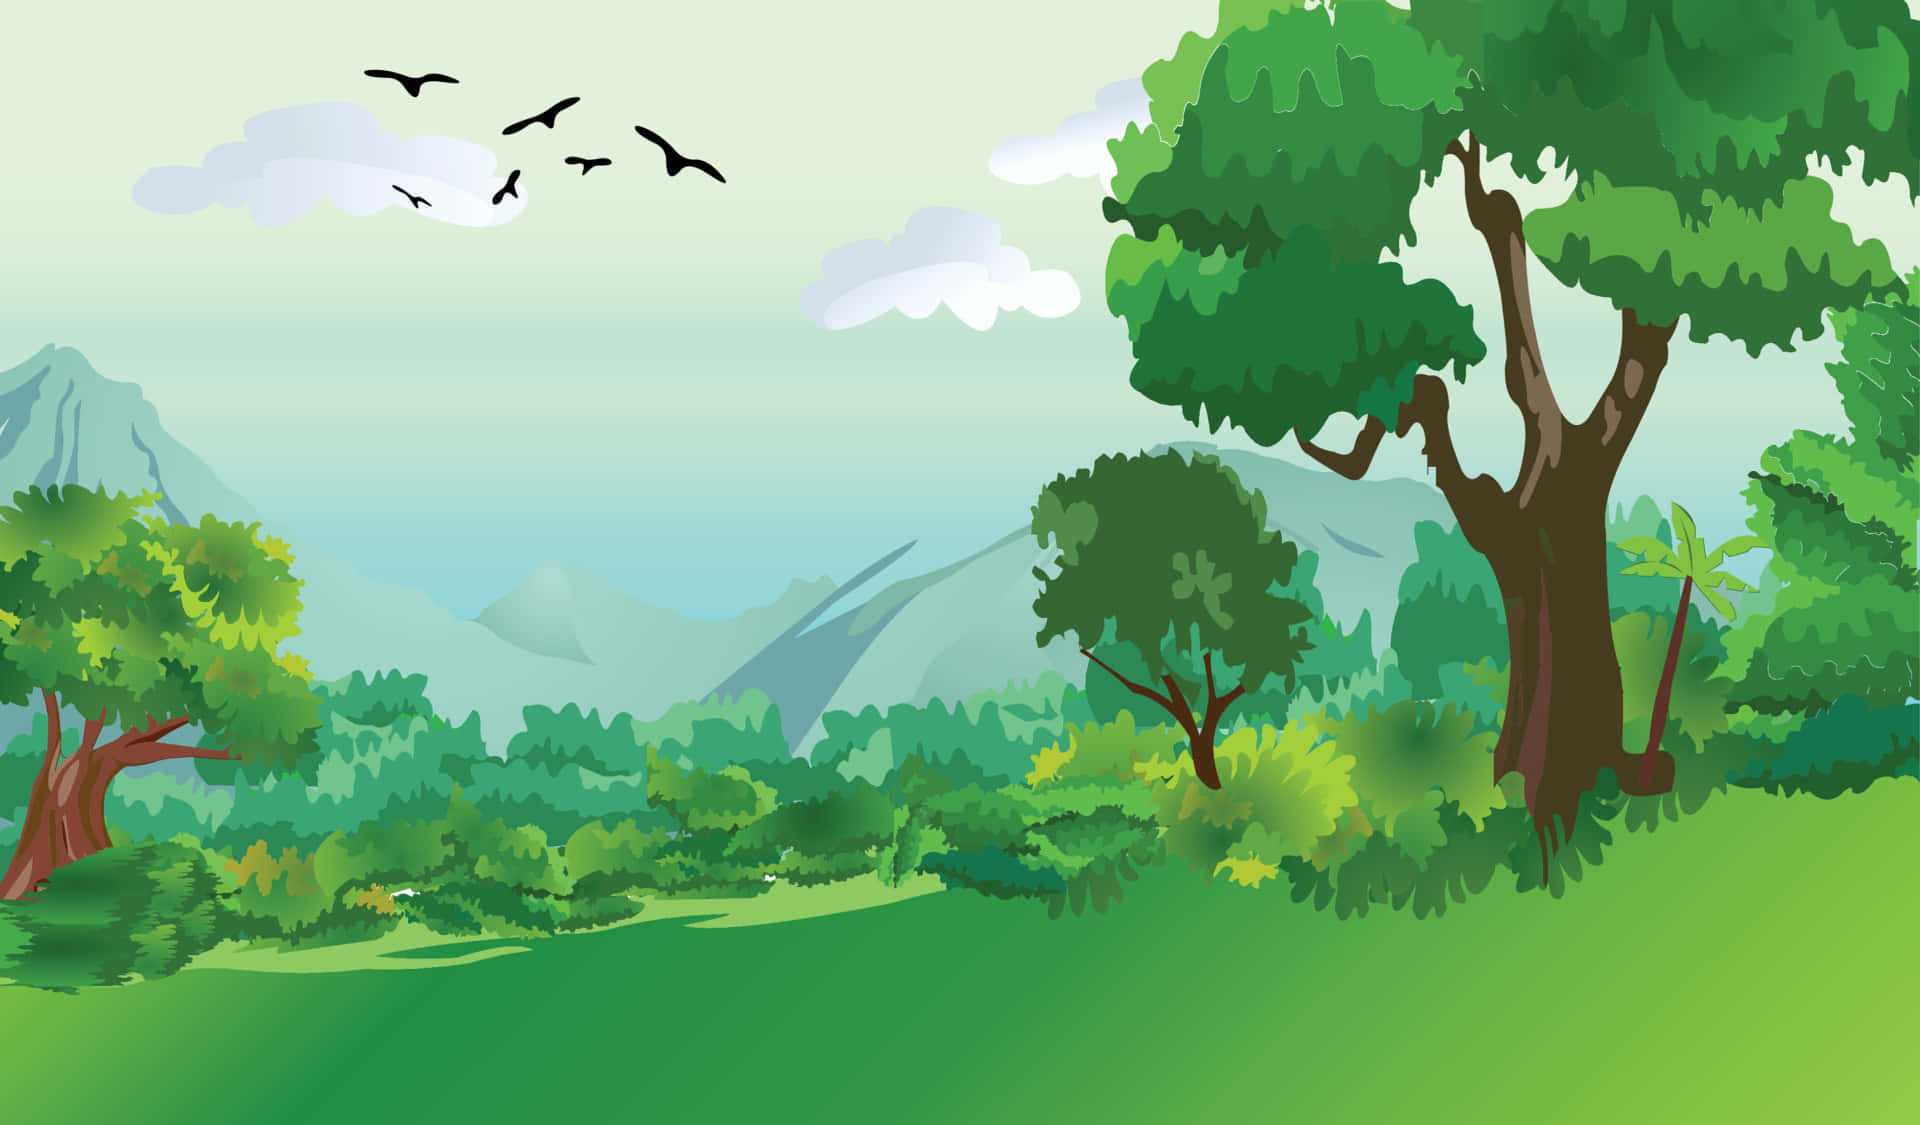 100+] Cartoon Forest Background s for FREE 